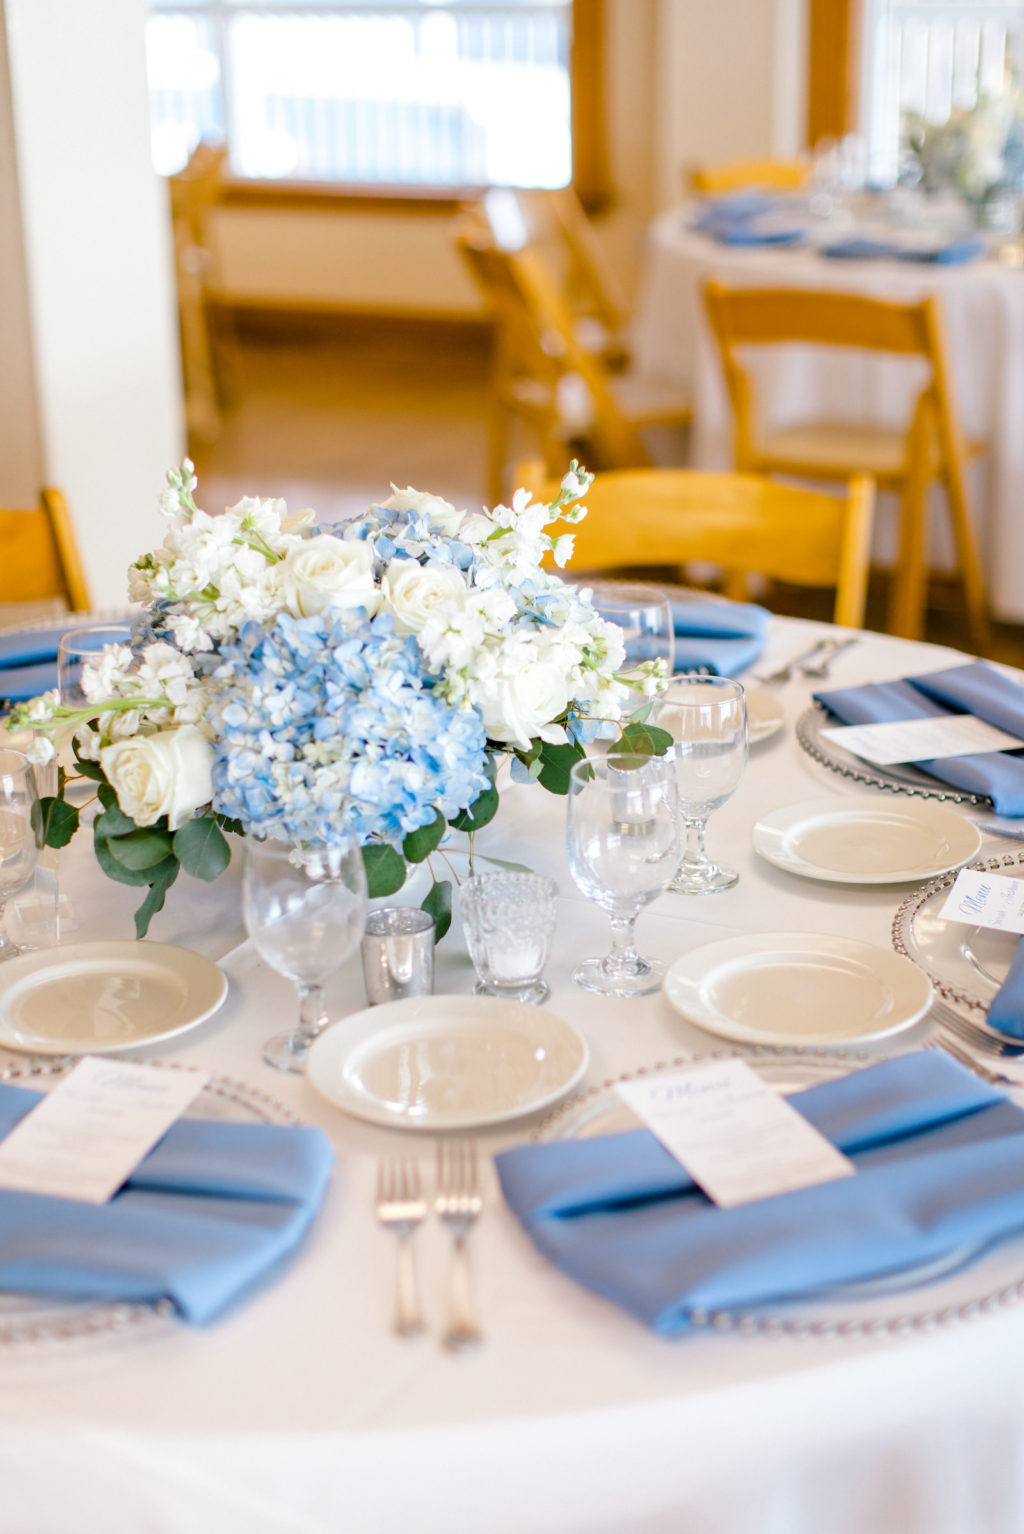 Blue and White Hydrangea Floral Centerpiece with Greenery and Acrylic Table Number | Dusty Blue Napkins | Wedding Reception Decor Ideas